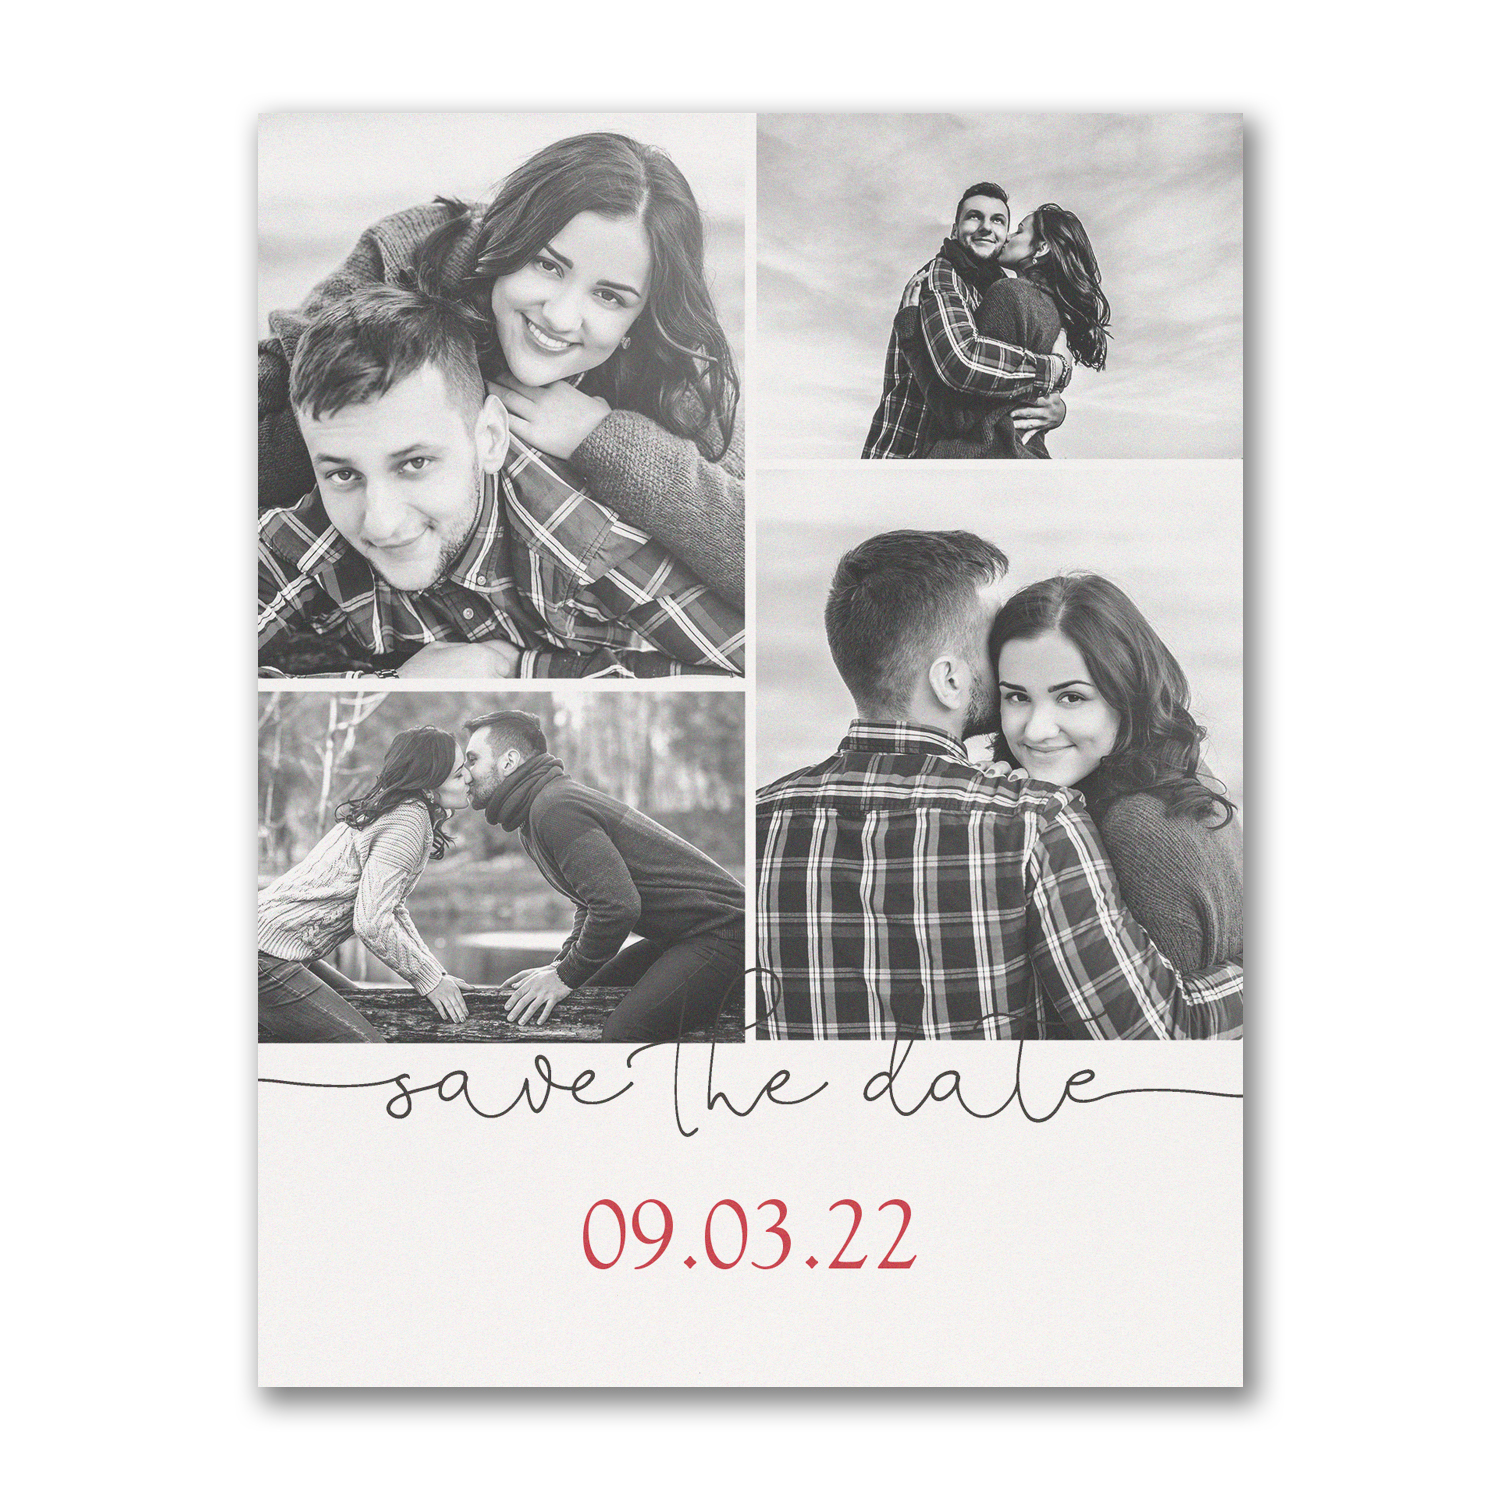 beautiful date photo collage save the date carlson craft